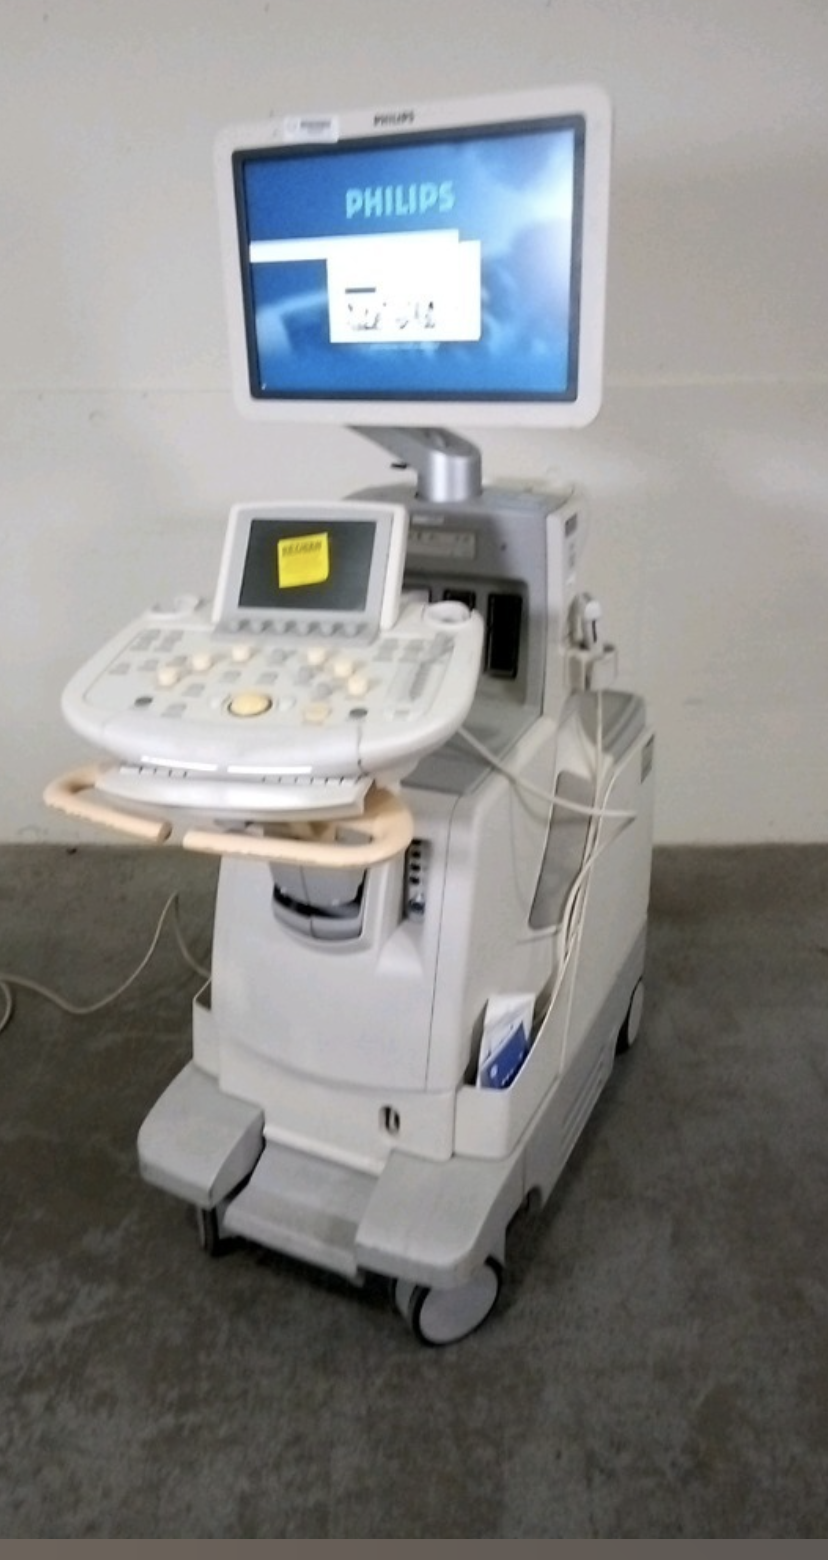 PHILIPS IU22 ULTRASOUND SYSTEM WITH 1 PROBE (L12-5) DIAGNOSTIC ULTRASOUND MACHINES FOR SALE